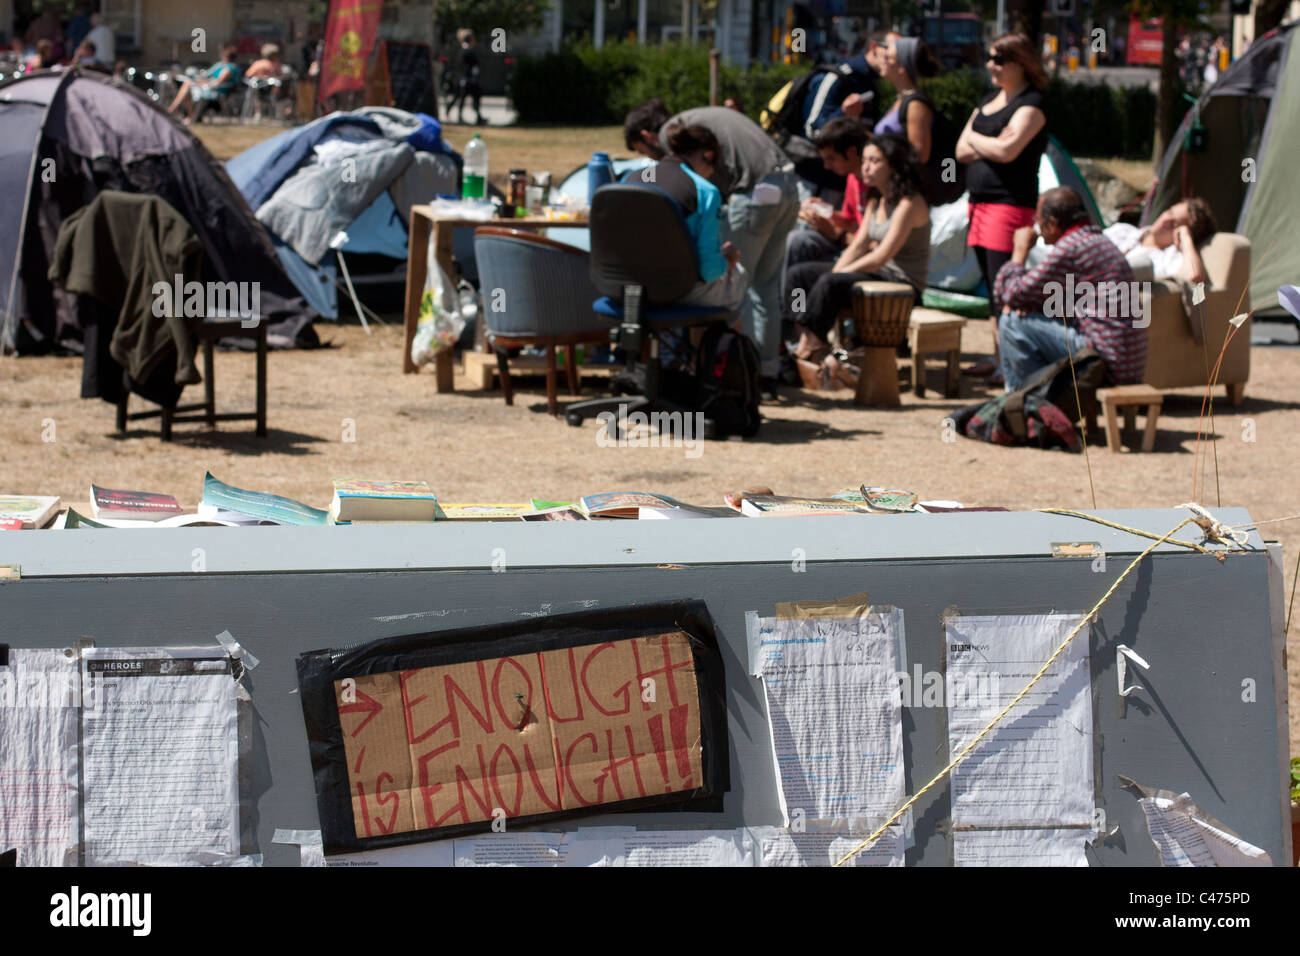 Students in Brighton, UK set up a protest camp to show solidarity with the students protesting unemployment & cuts in Spain. Stock Photo